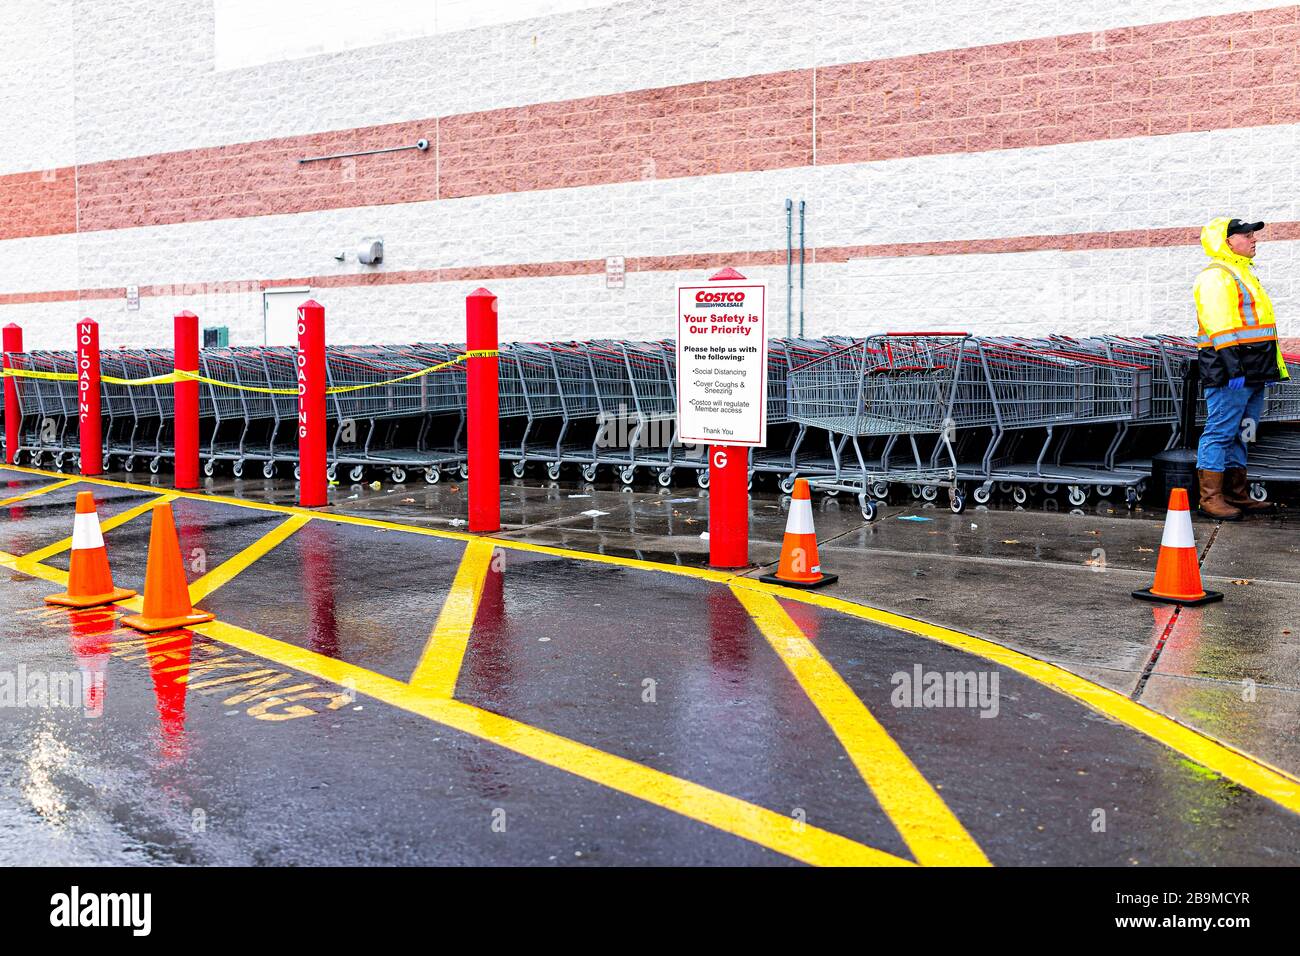 Sterling, USA - March 23, 2020: People by shopping carts at entrance to Costco discount membership club store during Coronavirus Covid-19 outbreak wit Stock Photo